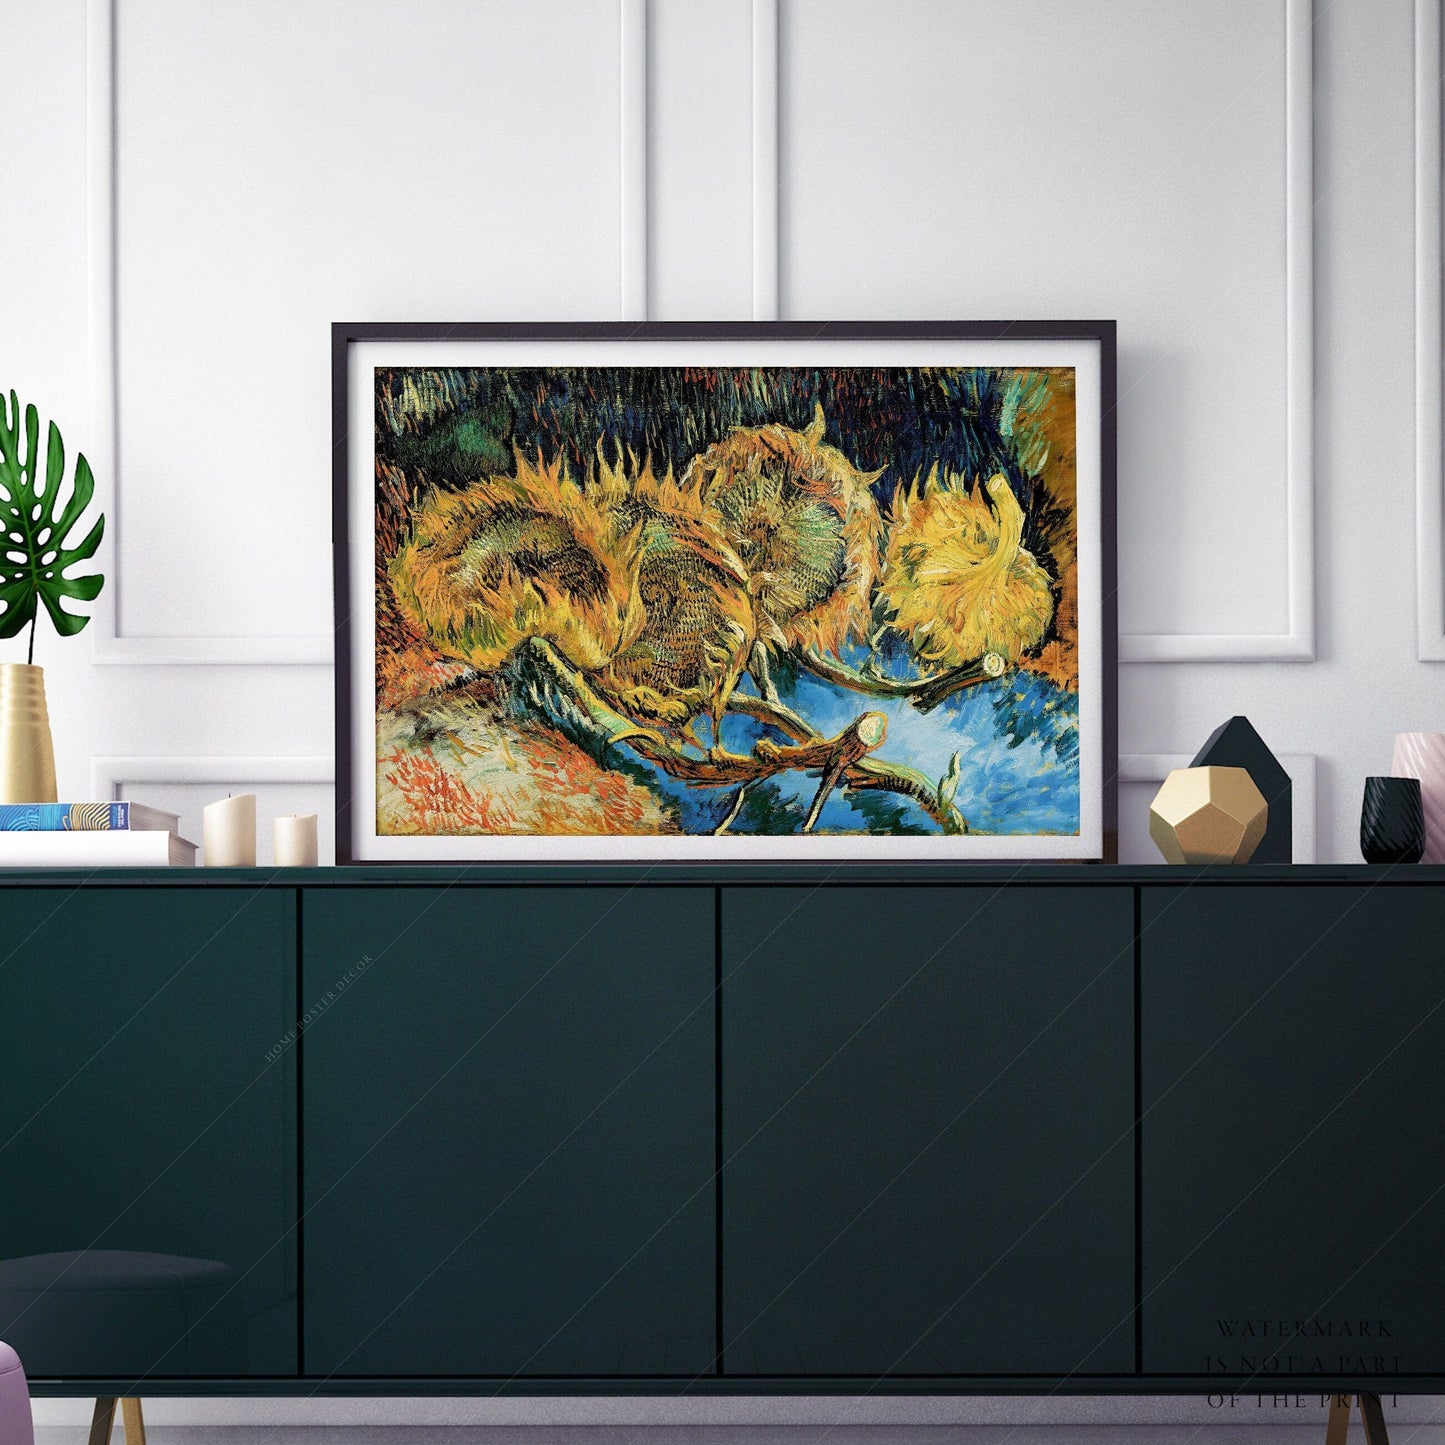 Home Poster Decor Van Gogh Print, Four sunflowers gone to seed, Landscape Art, Impressionist painter, Wedding Gift, Living Room Decor, VanGogh Reproduction 25